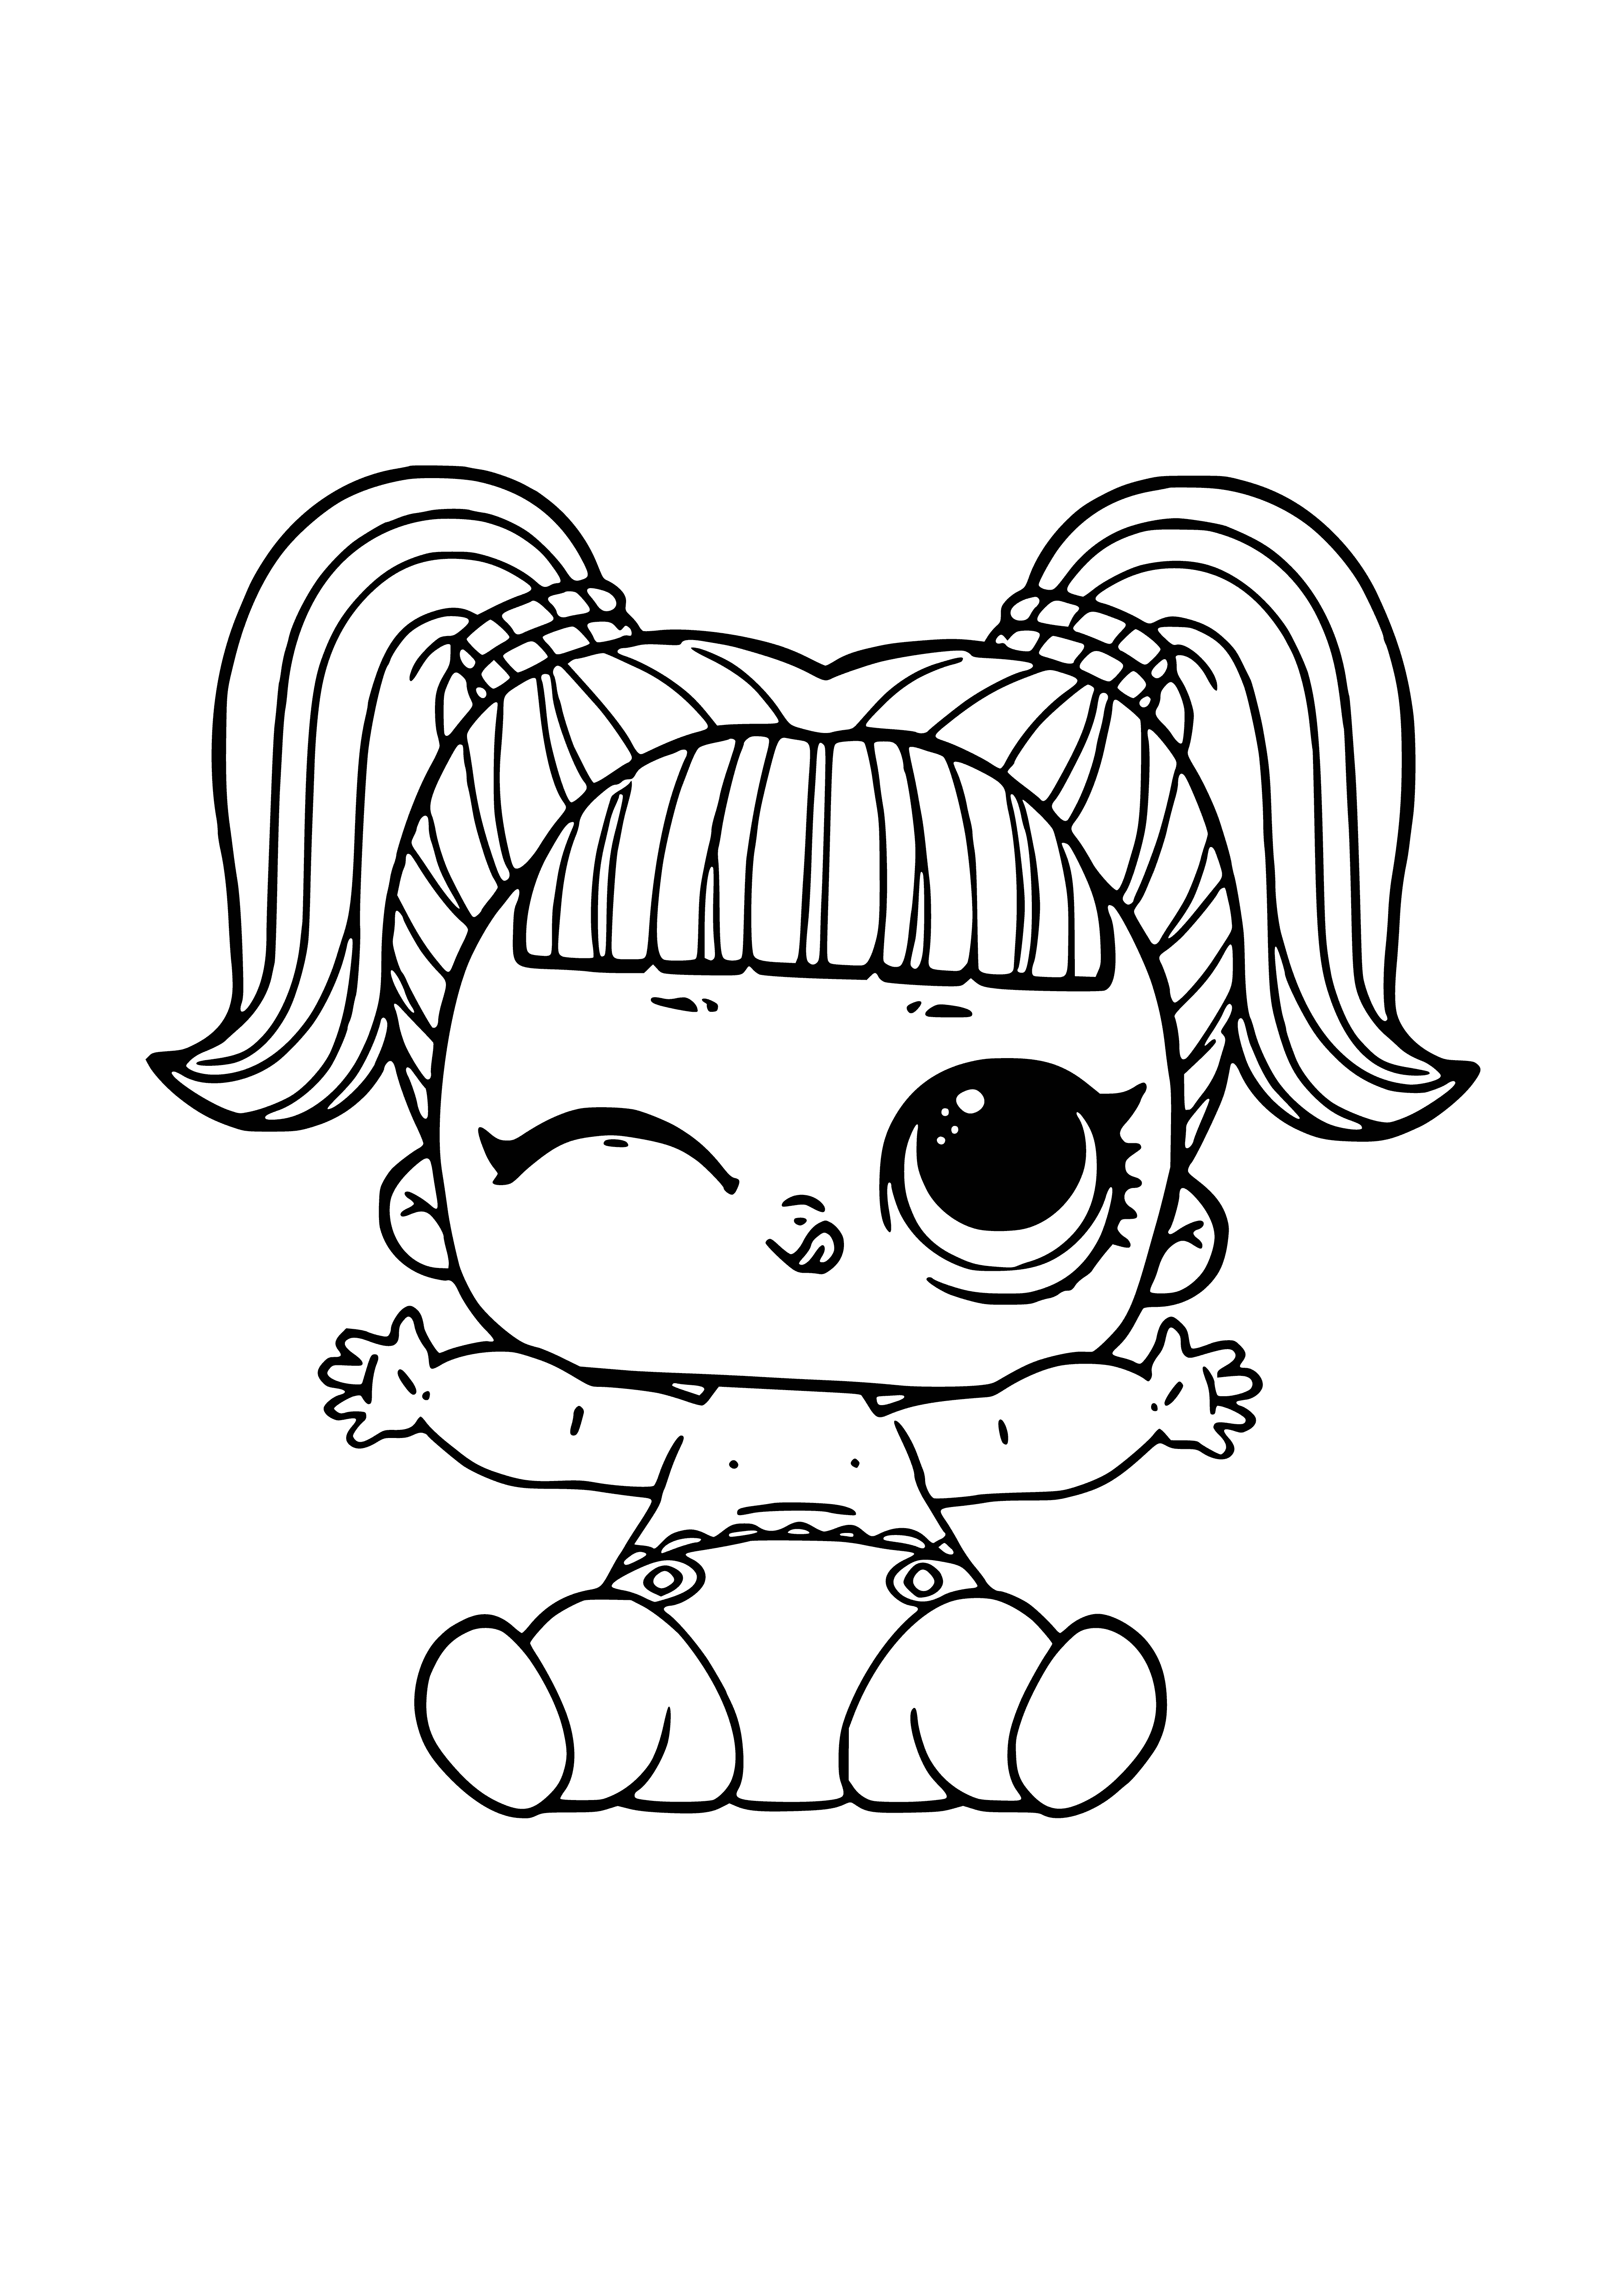 coloring page: Baby unicorn stares with sparkly blue eye, long horn, soft fur, tufted tail & hooves. Seems friendly and playful.